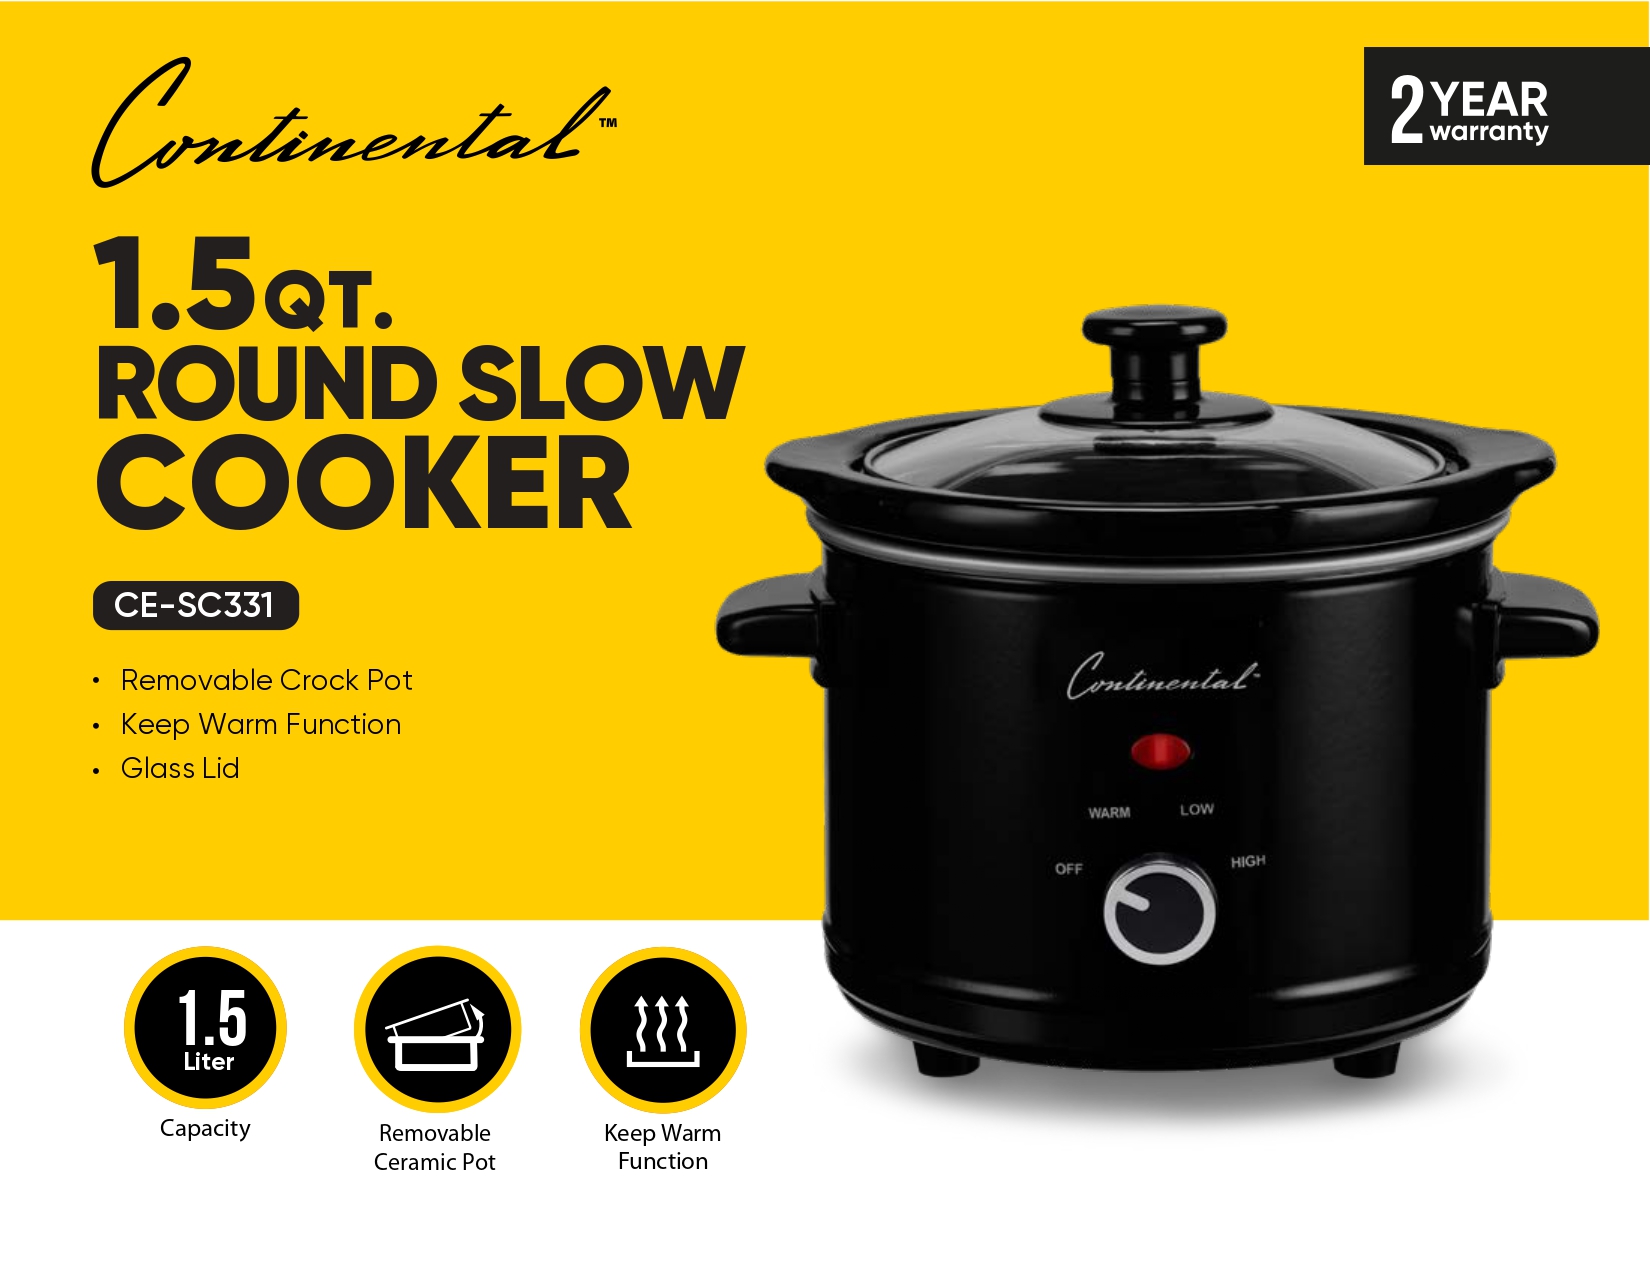 1.5QT. ROUND SLOW COOKER